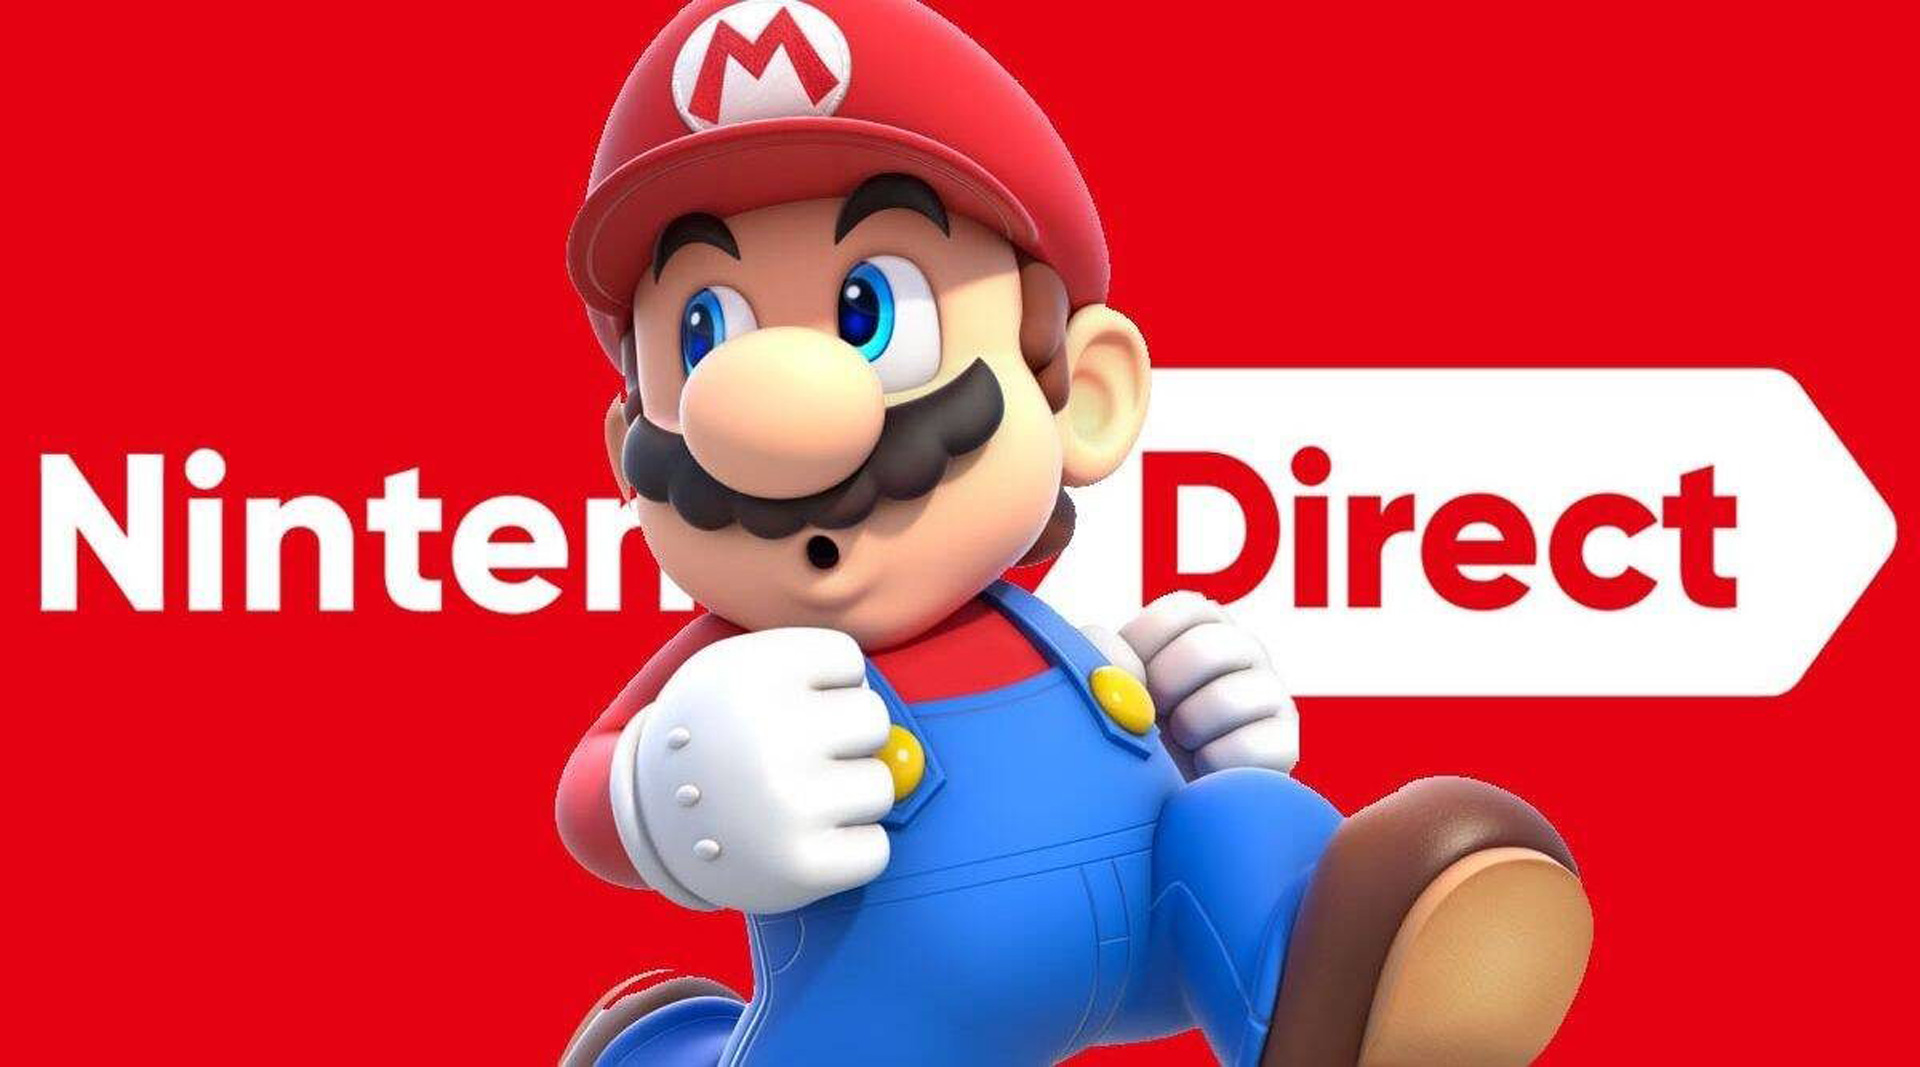 Nintendo Direct September 2022: What should we expect?